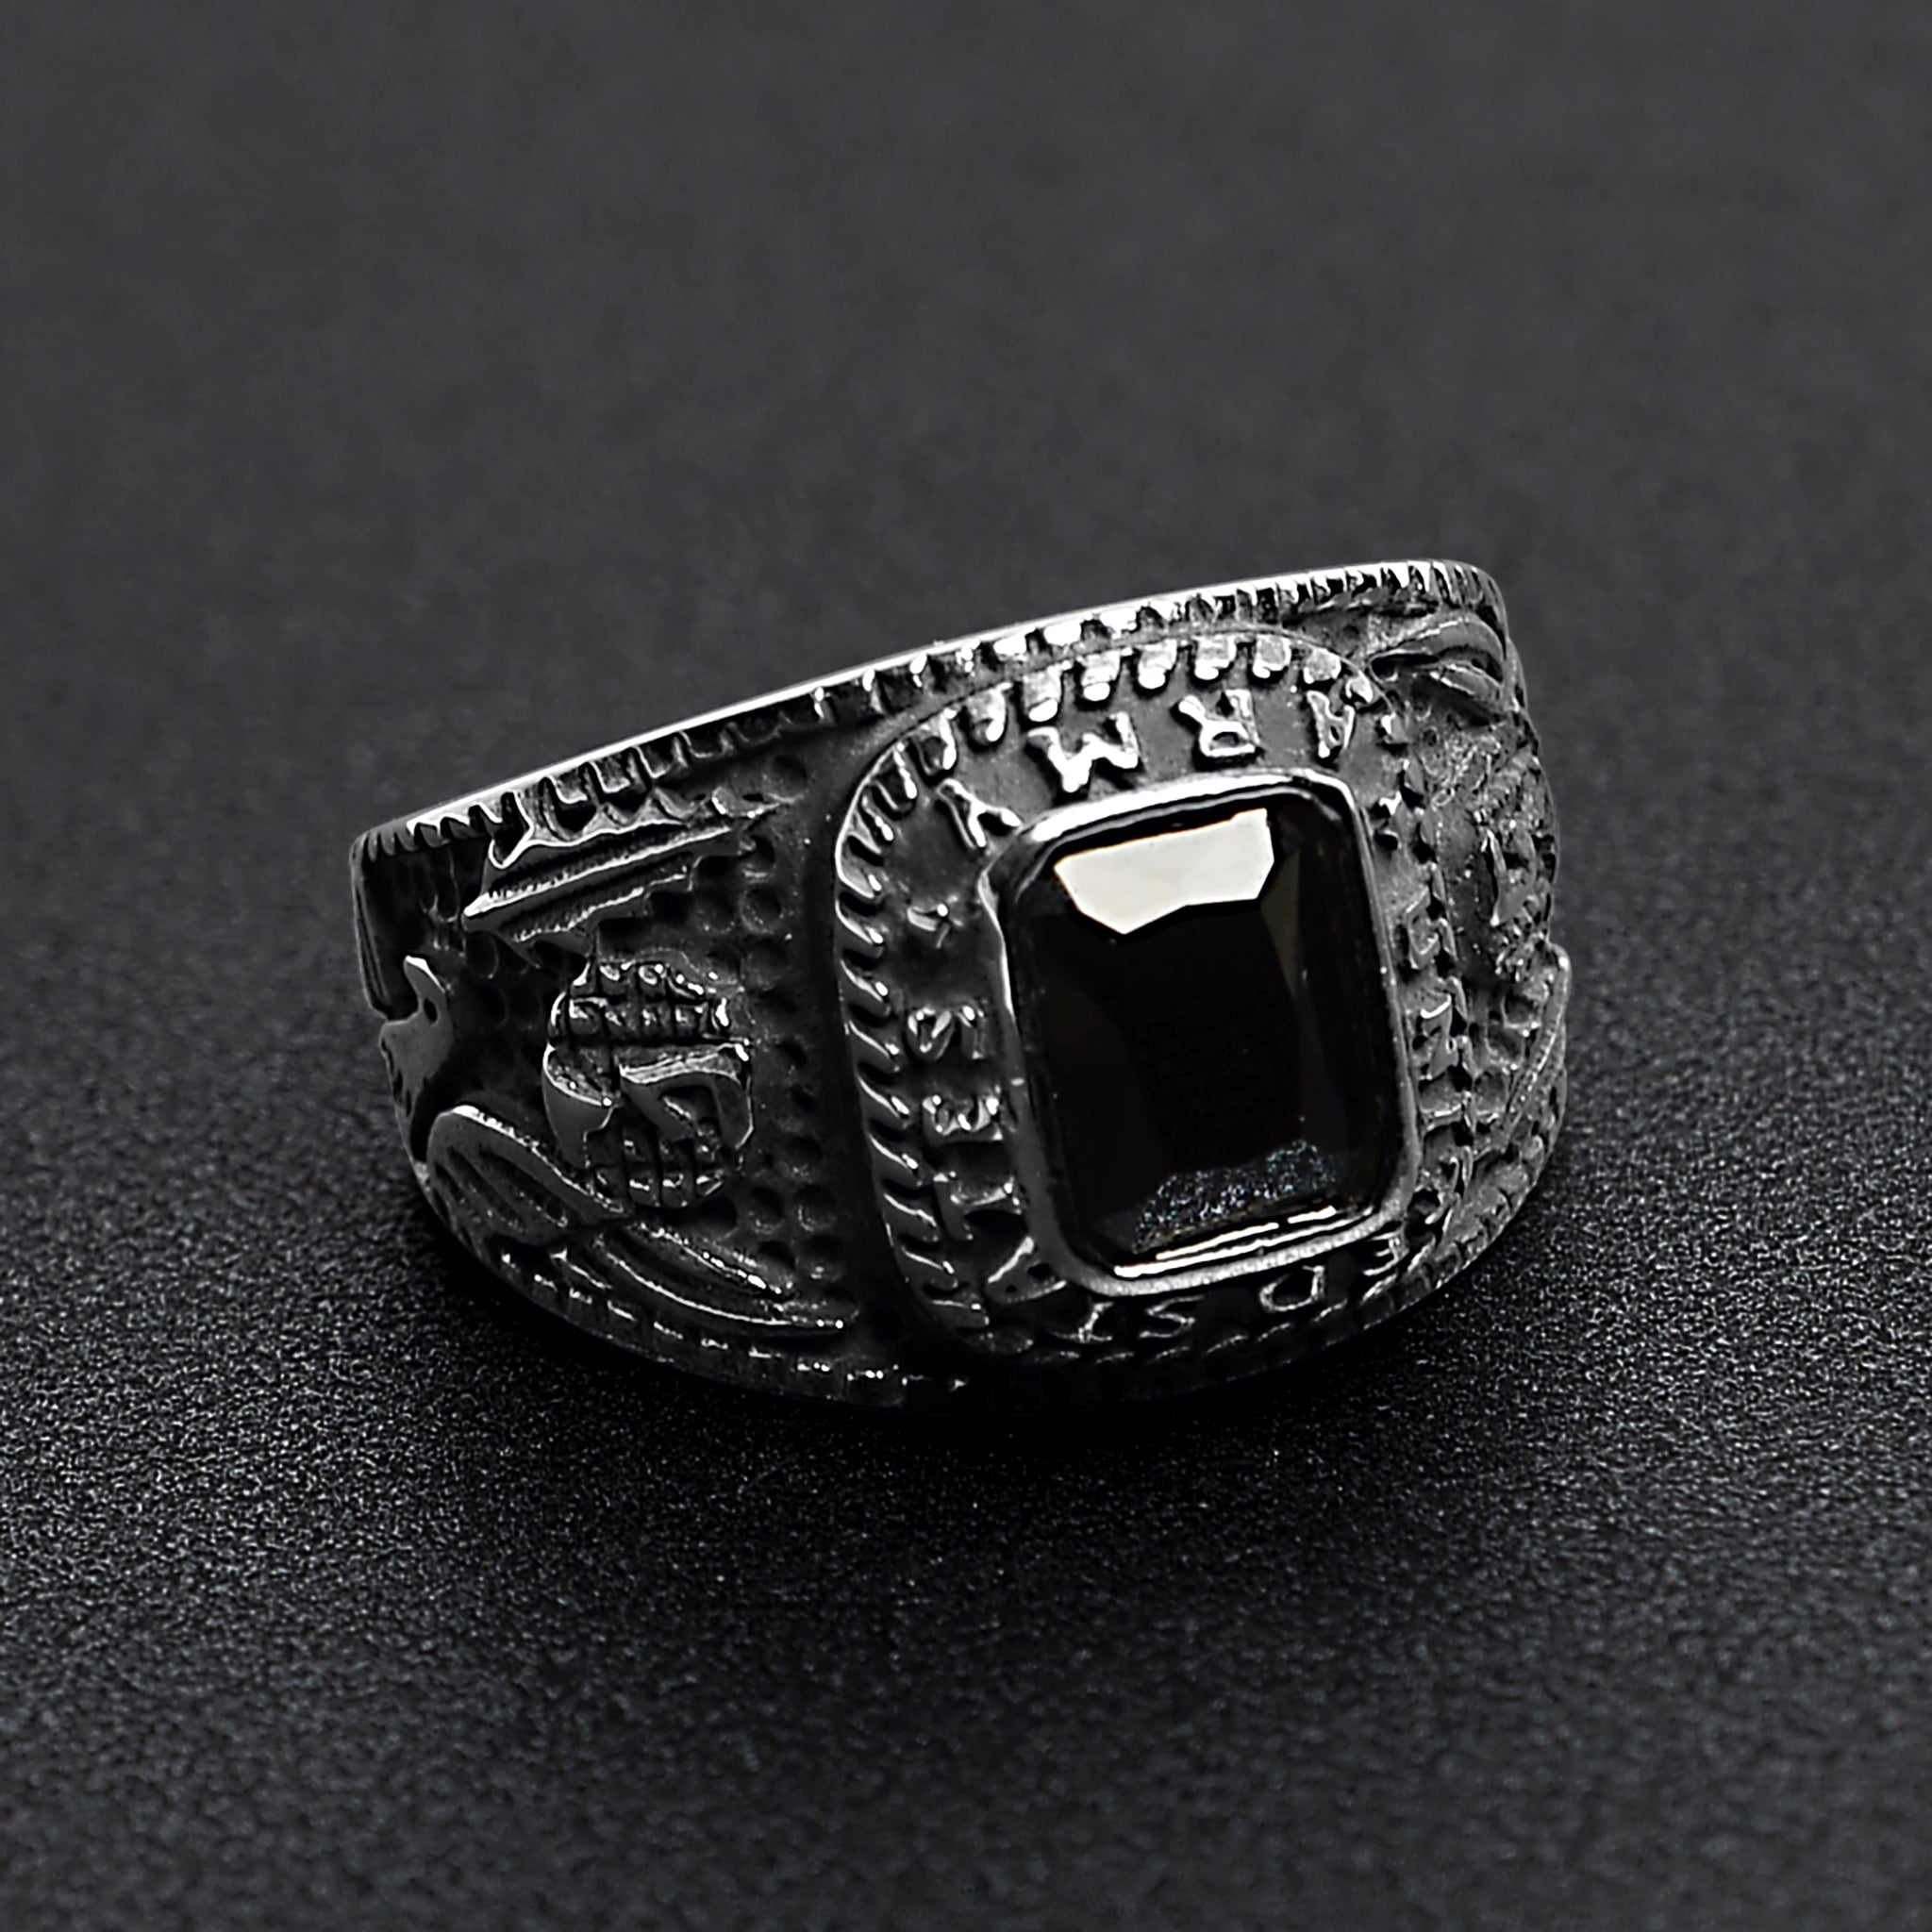 Yubnlvae Rings Accessories Fashion Elegant Black Stone Jewelry Relief  Sculpture Ring Jewelry Engaged Ring for Women - Walmart.com